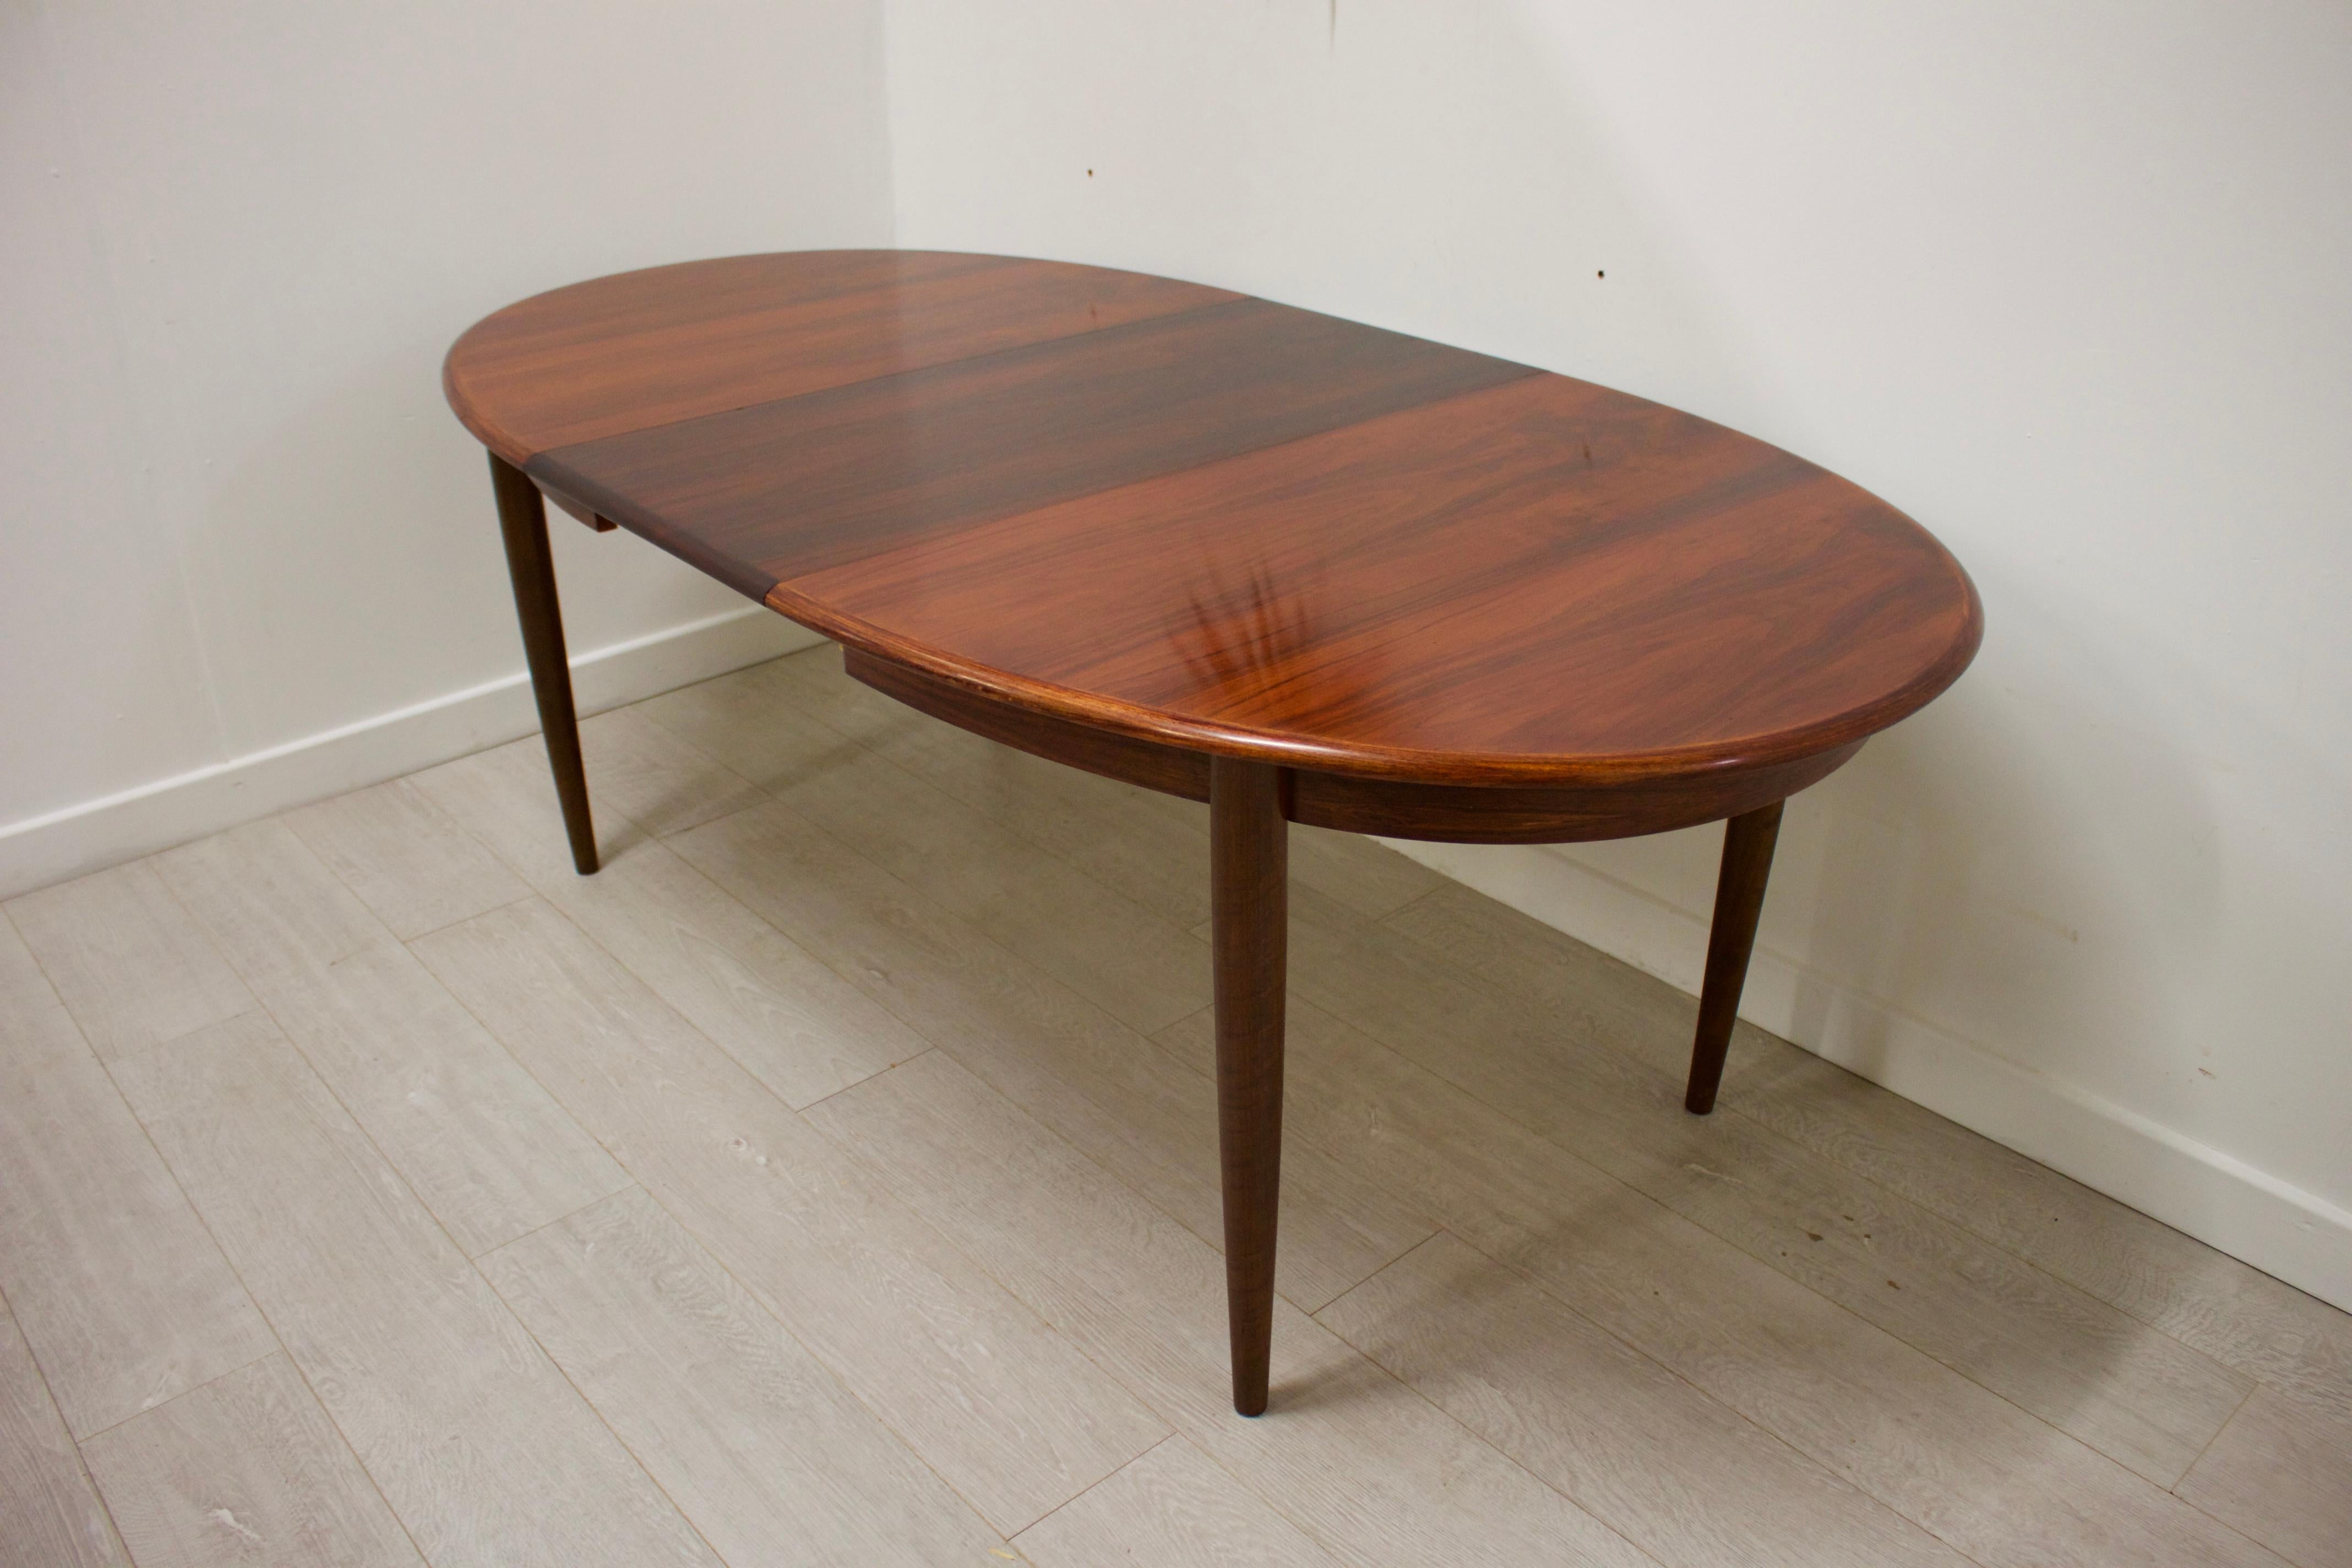 - Midcentury extending dining table
- Made from Rosewood
- Measures: Table extended length 198cm.